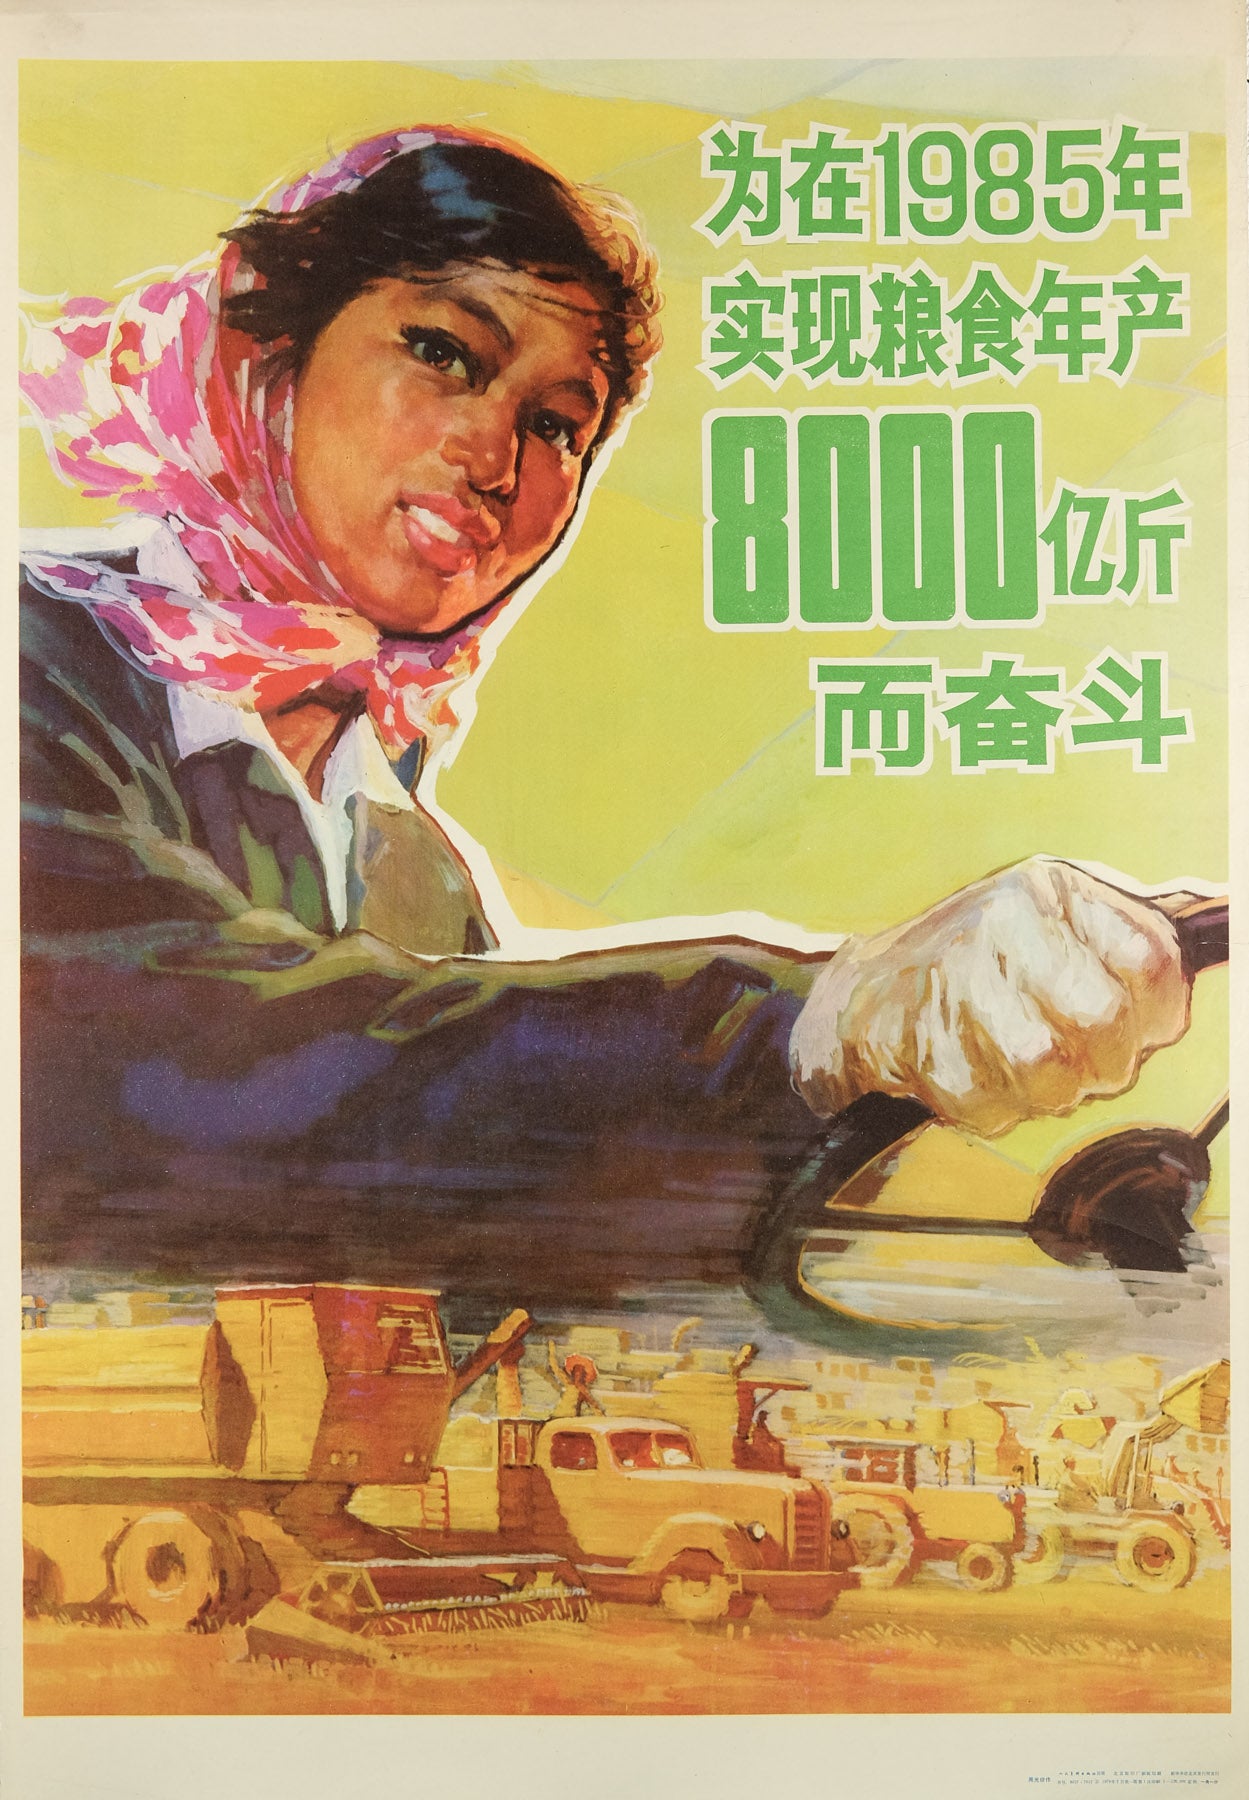 original vintage 1979 Chinese communist propaganda poster Strive to reach 800 billion jin annual food production by 1985 by Zhou Guangjie